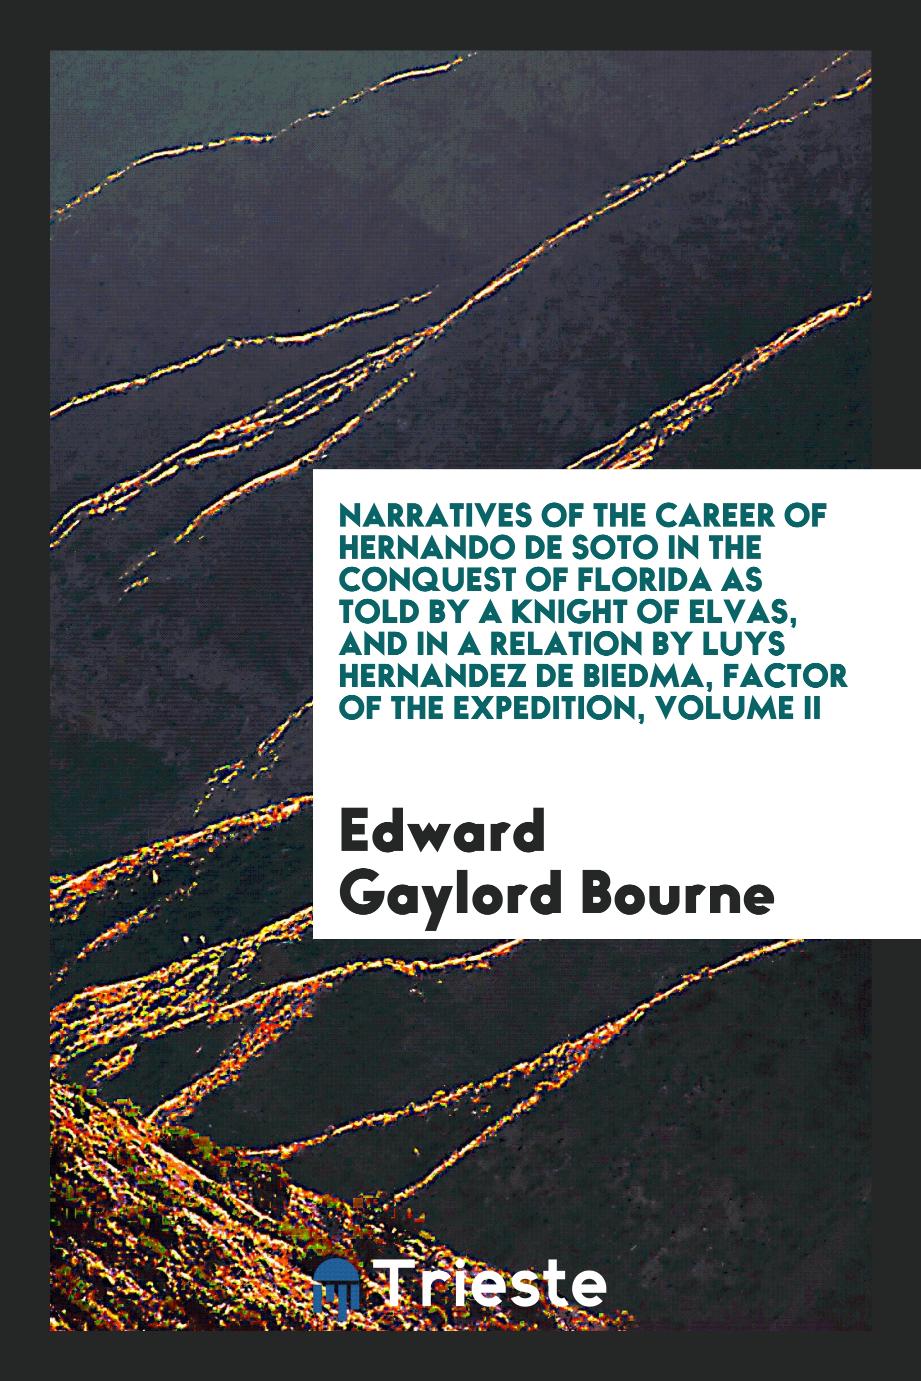 Narratives of the career of Hernando de Soto in the conquest of Florida as told by a knight of Elvas, and in a relation by Luys Hernandez de Biedma, factor of the expedition, volume II